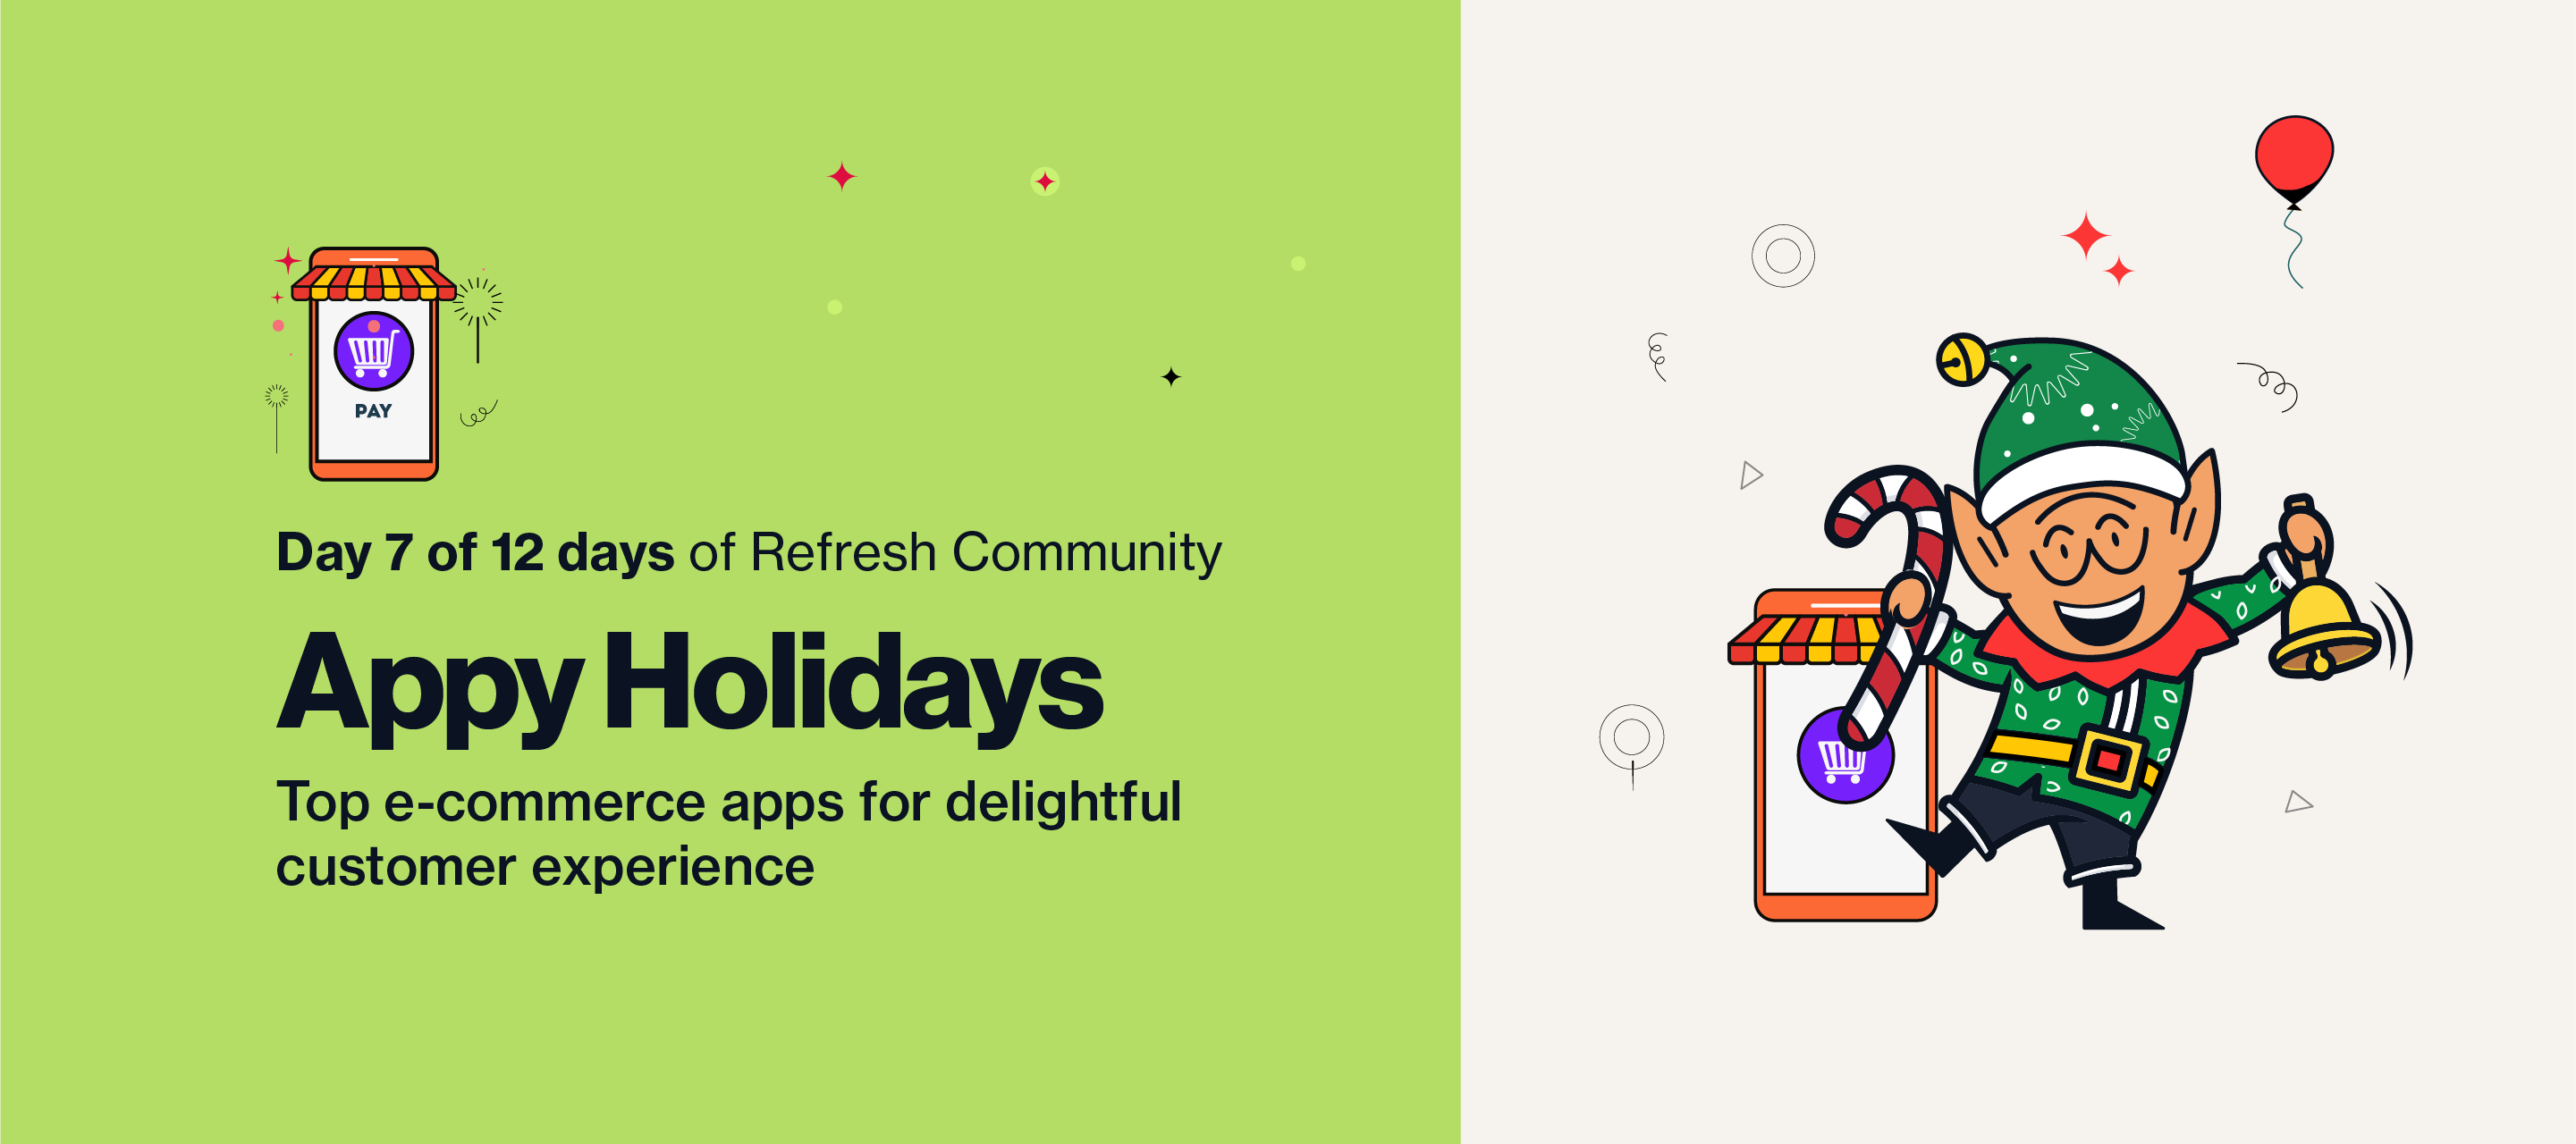 Day 7: Appy Holidays | E-commerce app roundup for delightful support experiences